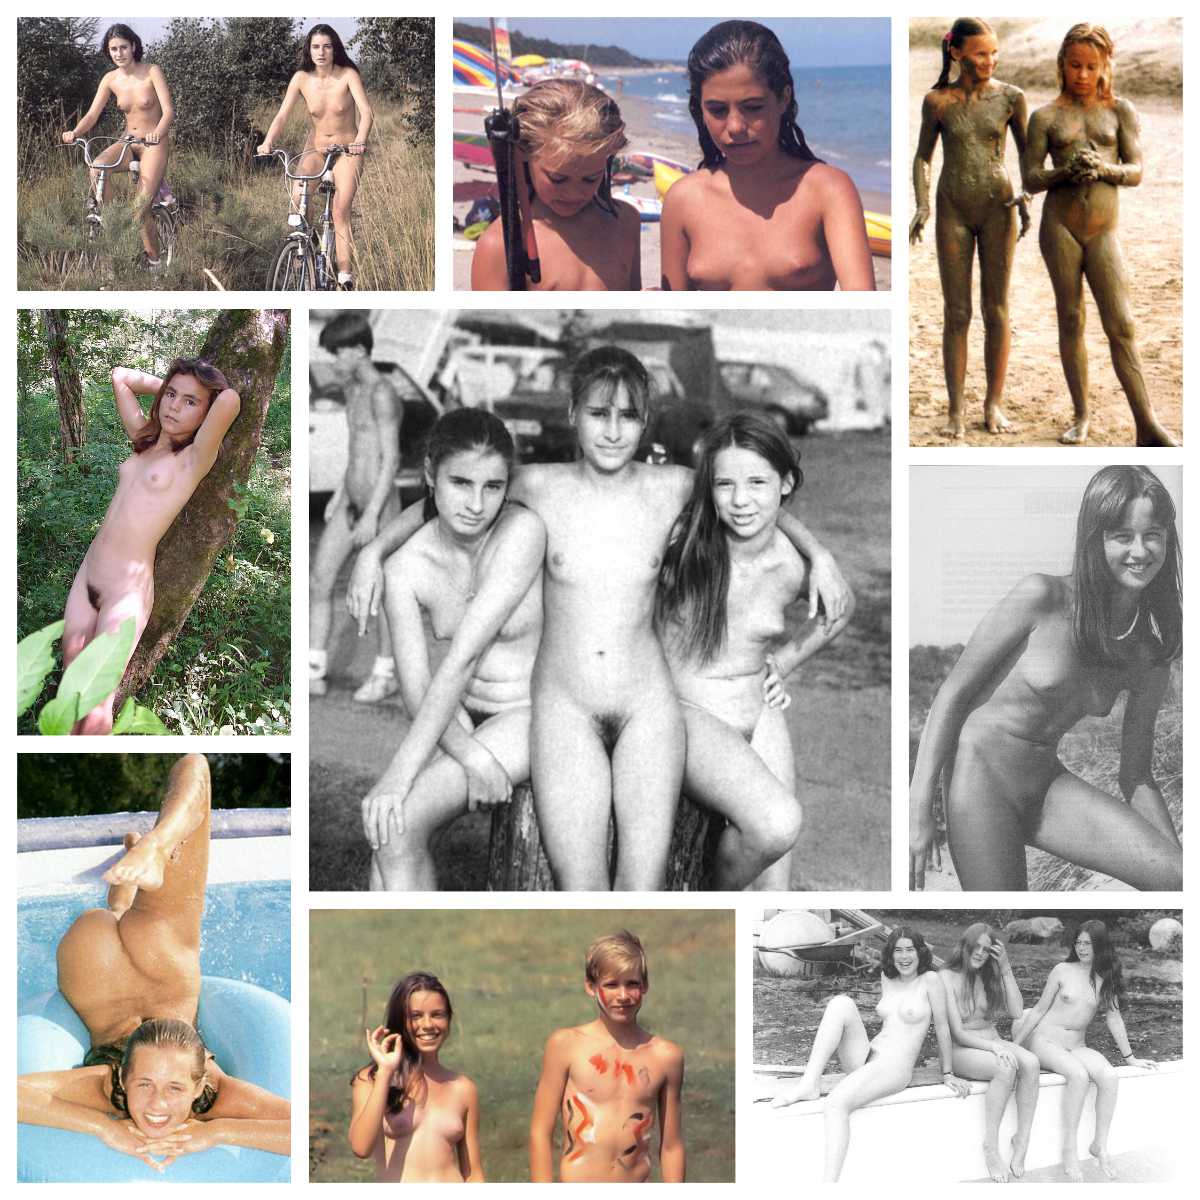 Naturist gallery of retro pictures of family nudism